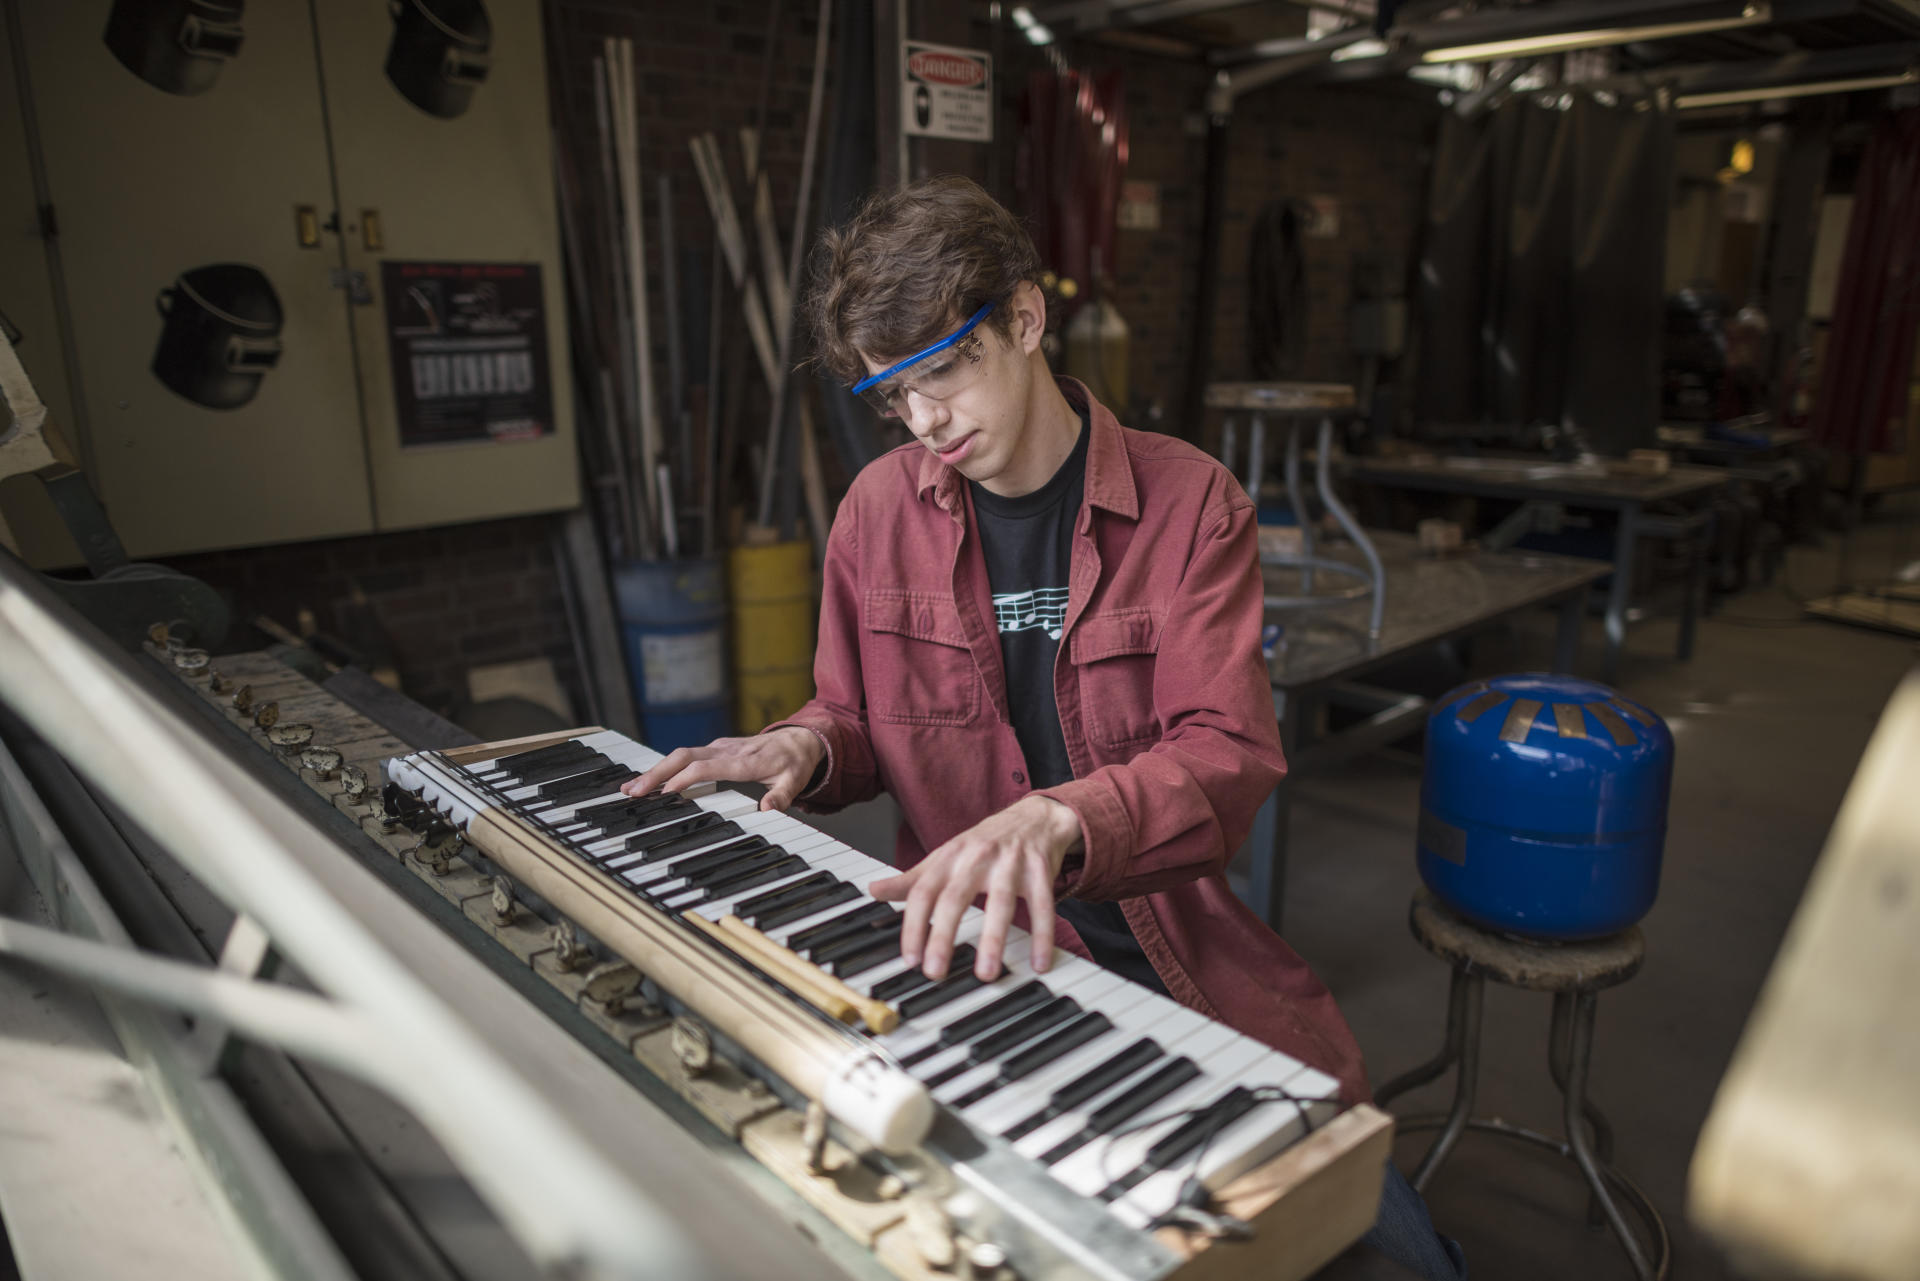 Daniel Michelson works on his DIY musical instrument creations in the Ayres Art Shop.